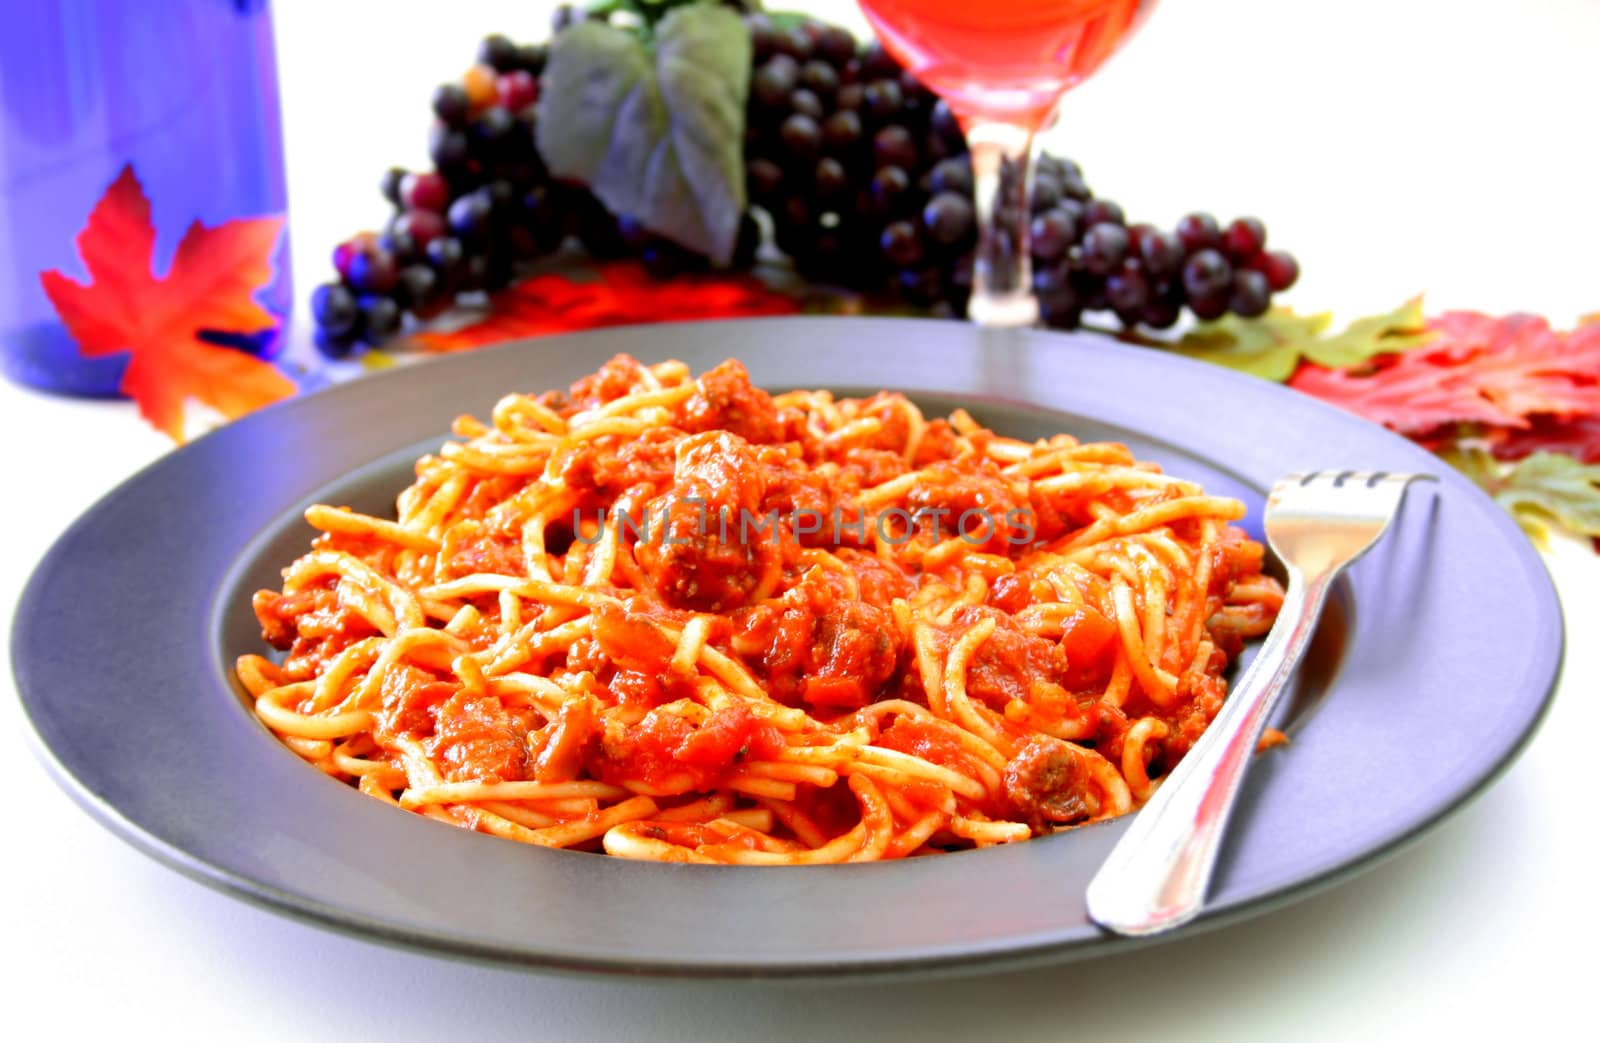 A plate of spaghetti with a glass of wine and wine bottle in the background.